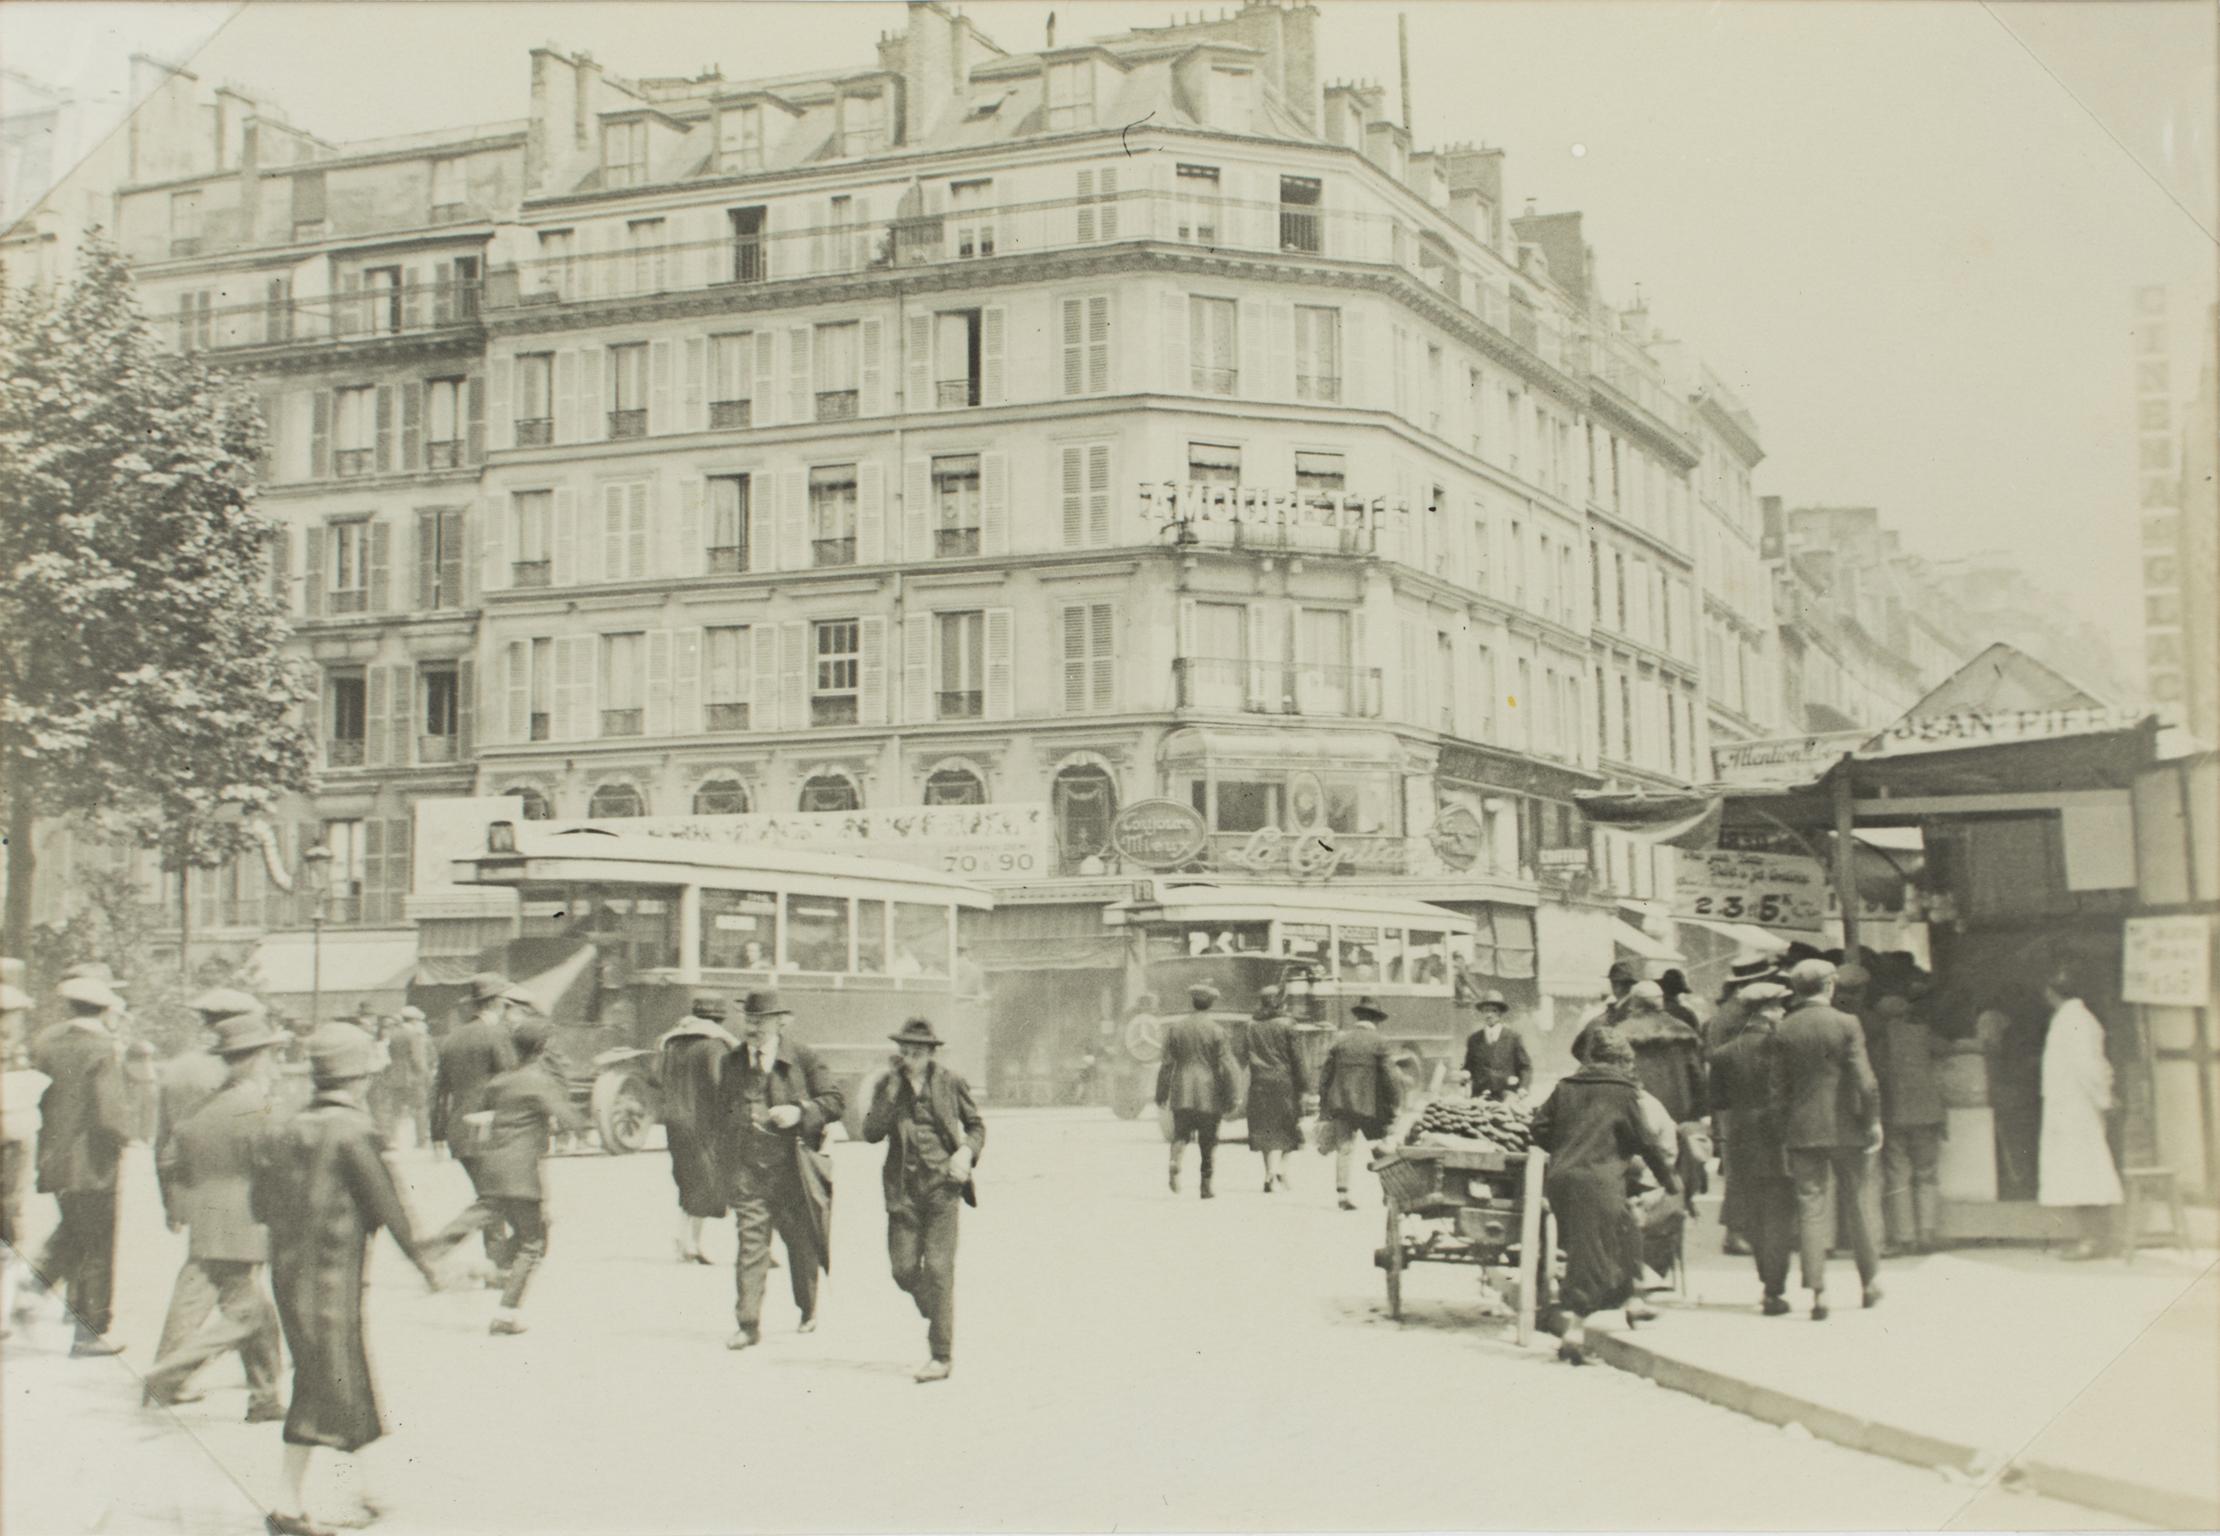 Unknown Landscape Photograph - Faubourg du Temple in Paris, 1926, Silver Gelatin Black and White Photography